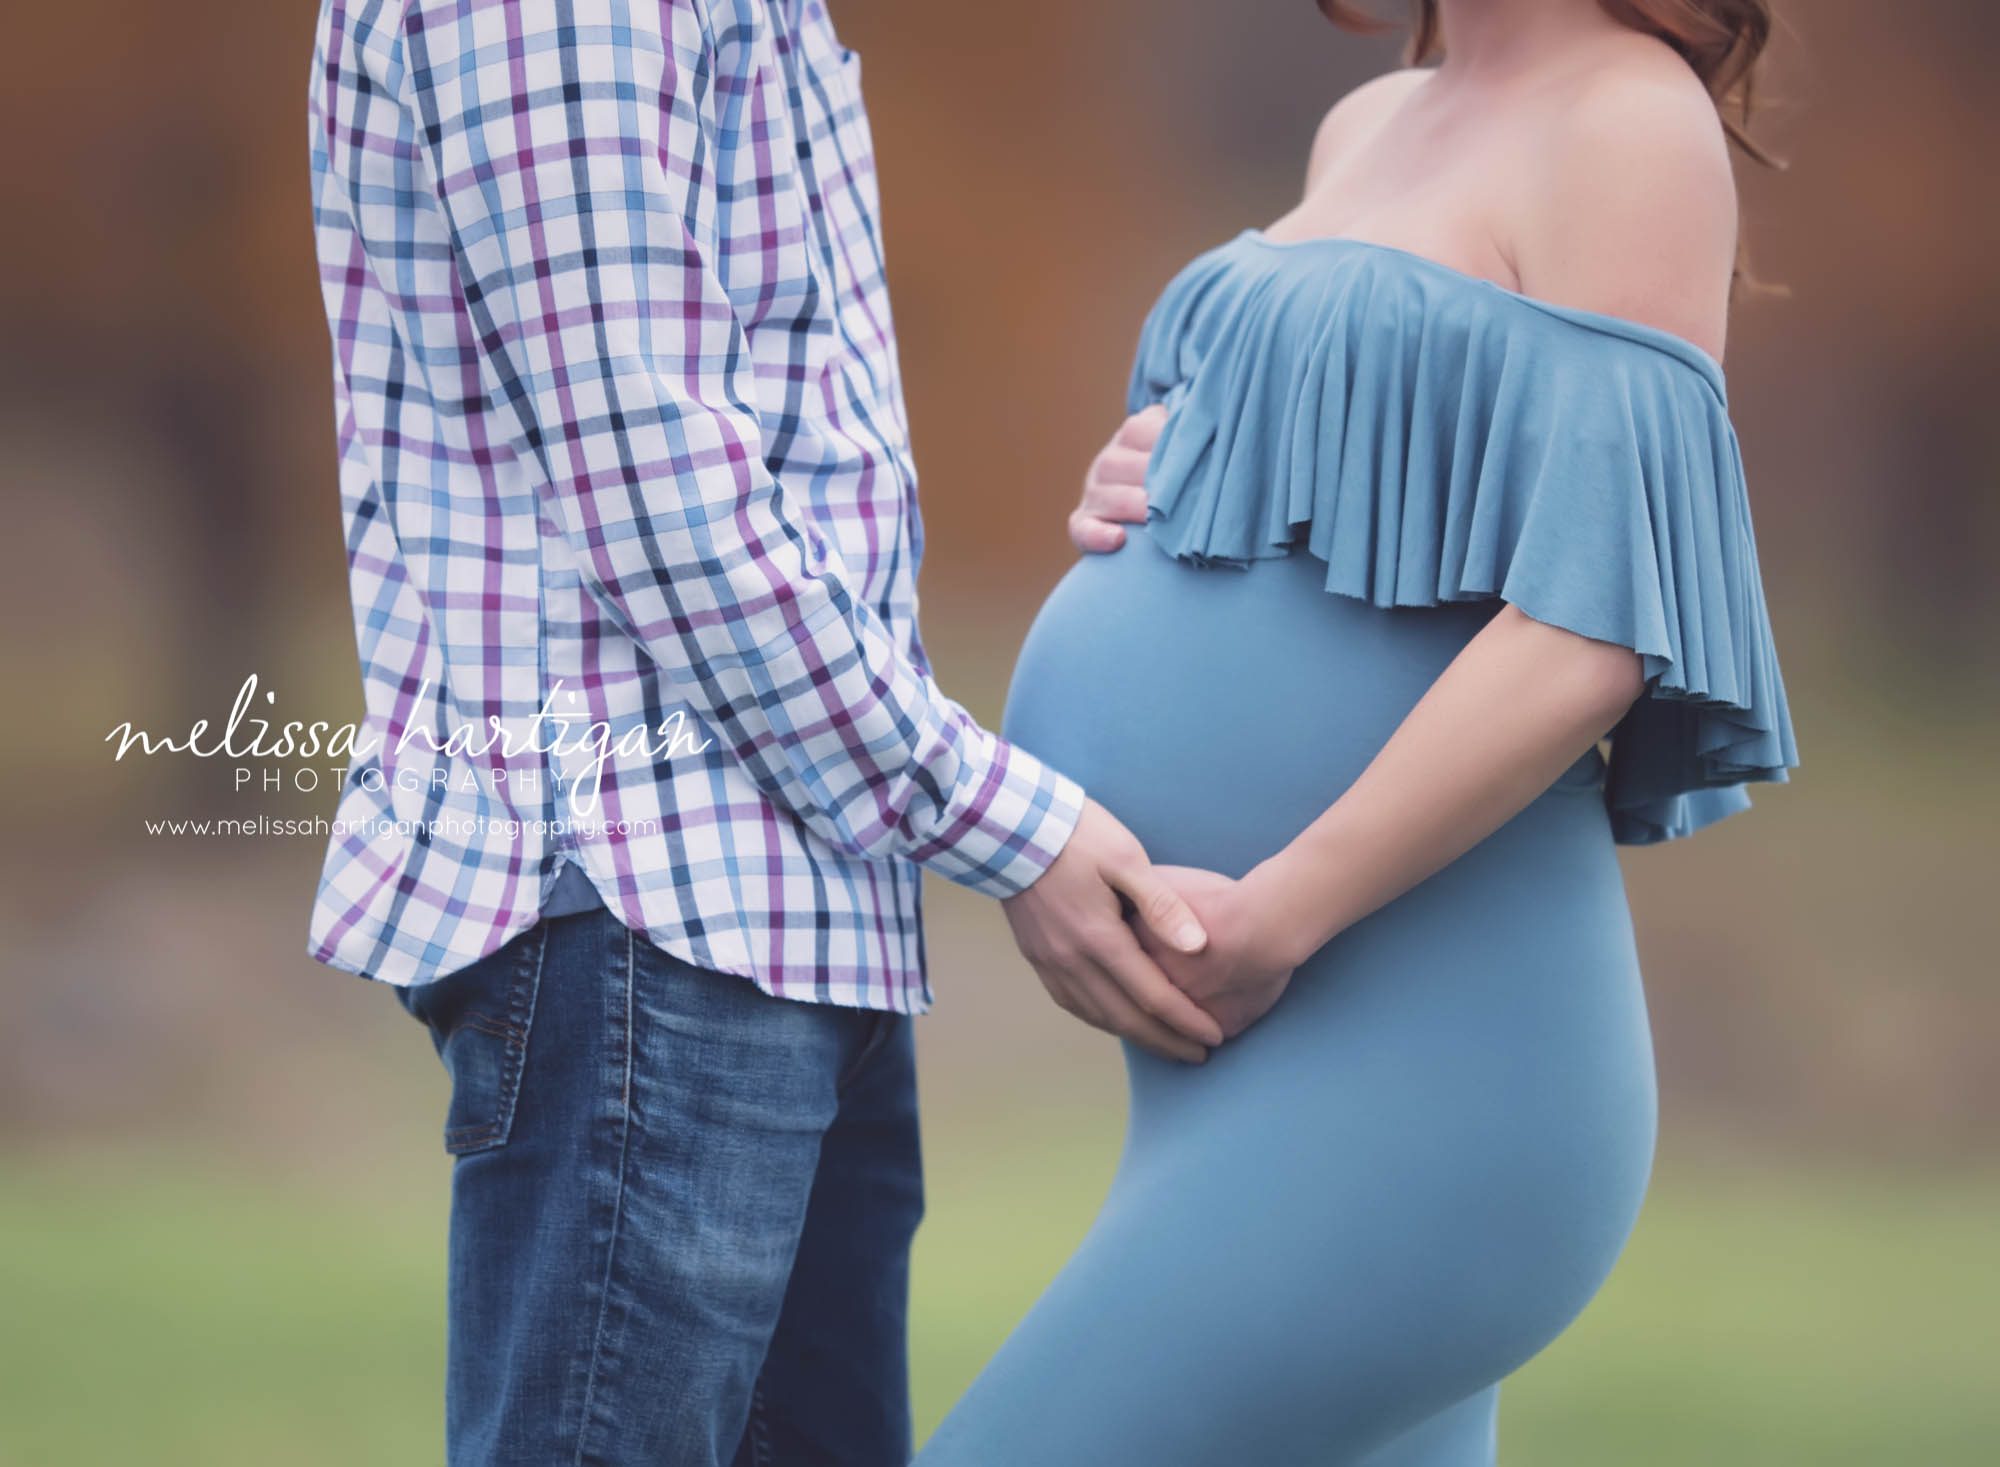 Melissa Hartigan Photography Coventry CT Newborn & Maternity Photographer Coventry CT Maternity Newborn Session Carrie wearing blue maternity gown standing in field holding baby bump with husband close up